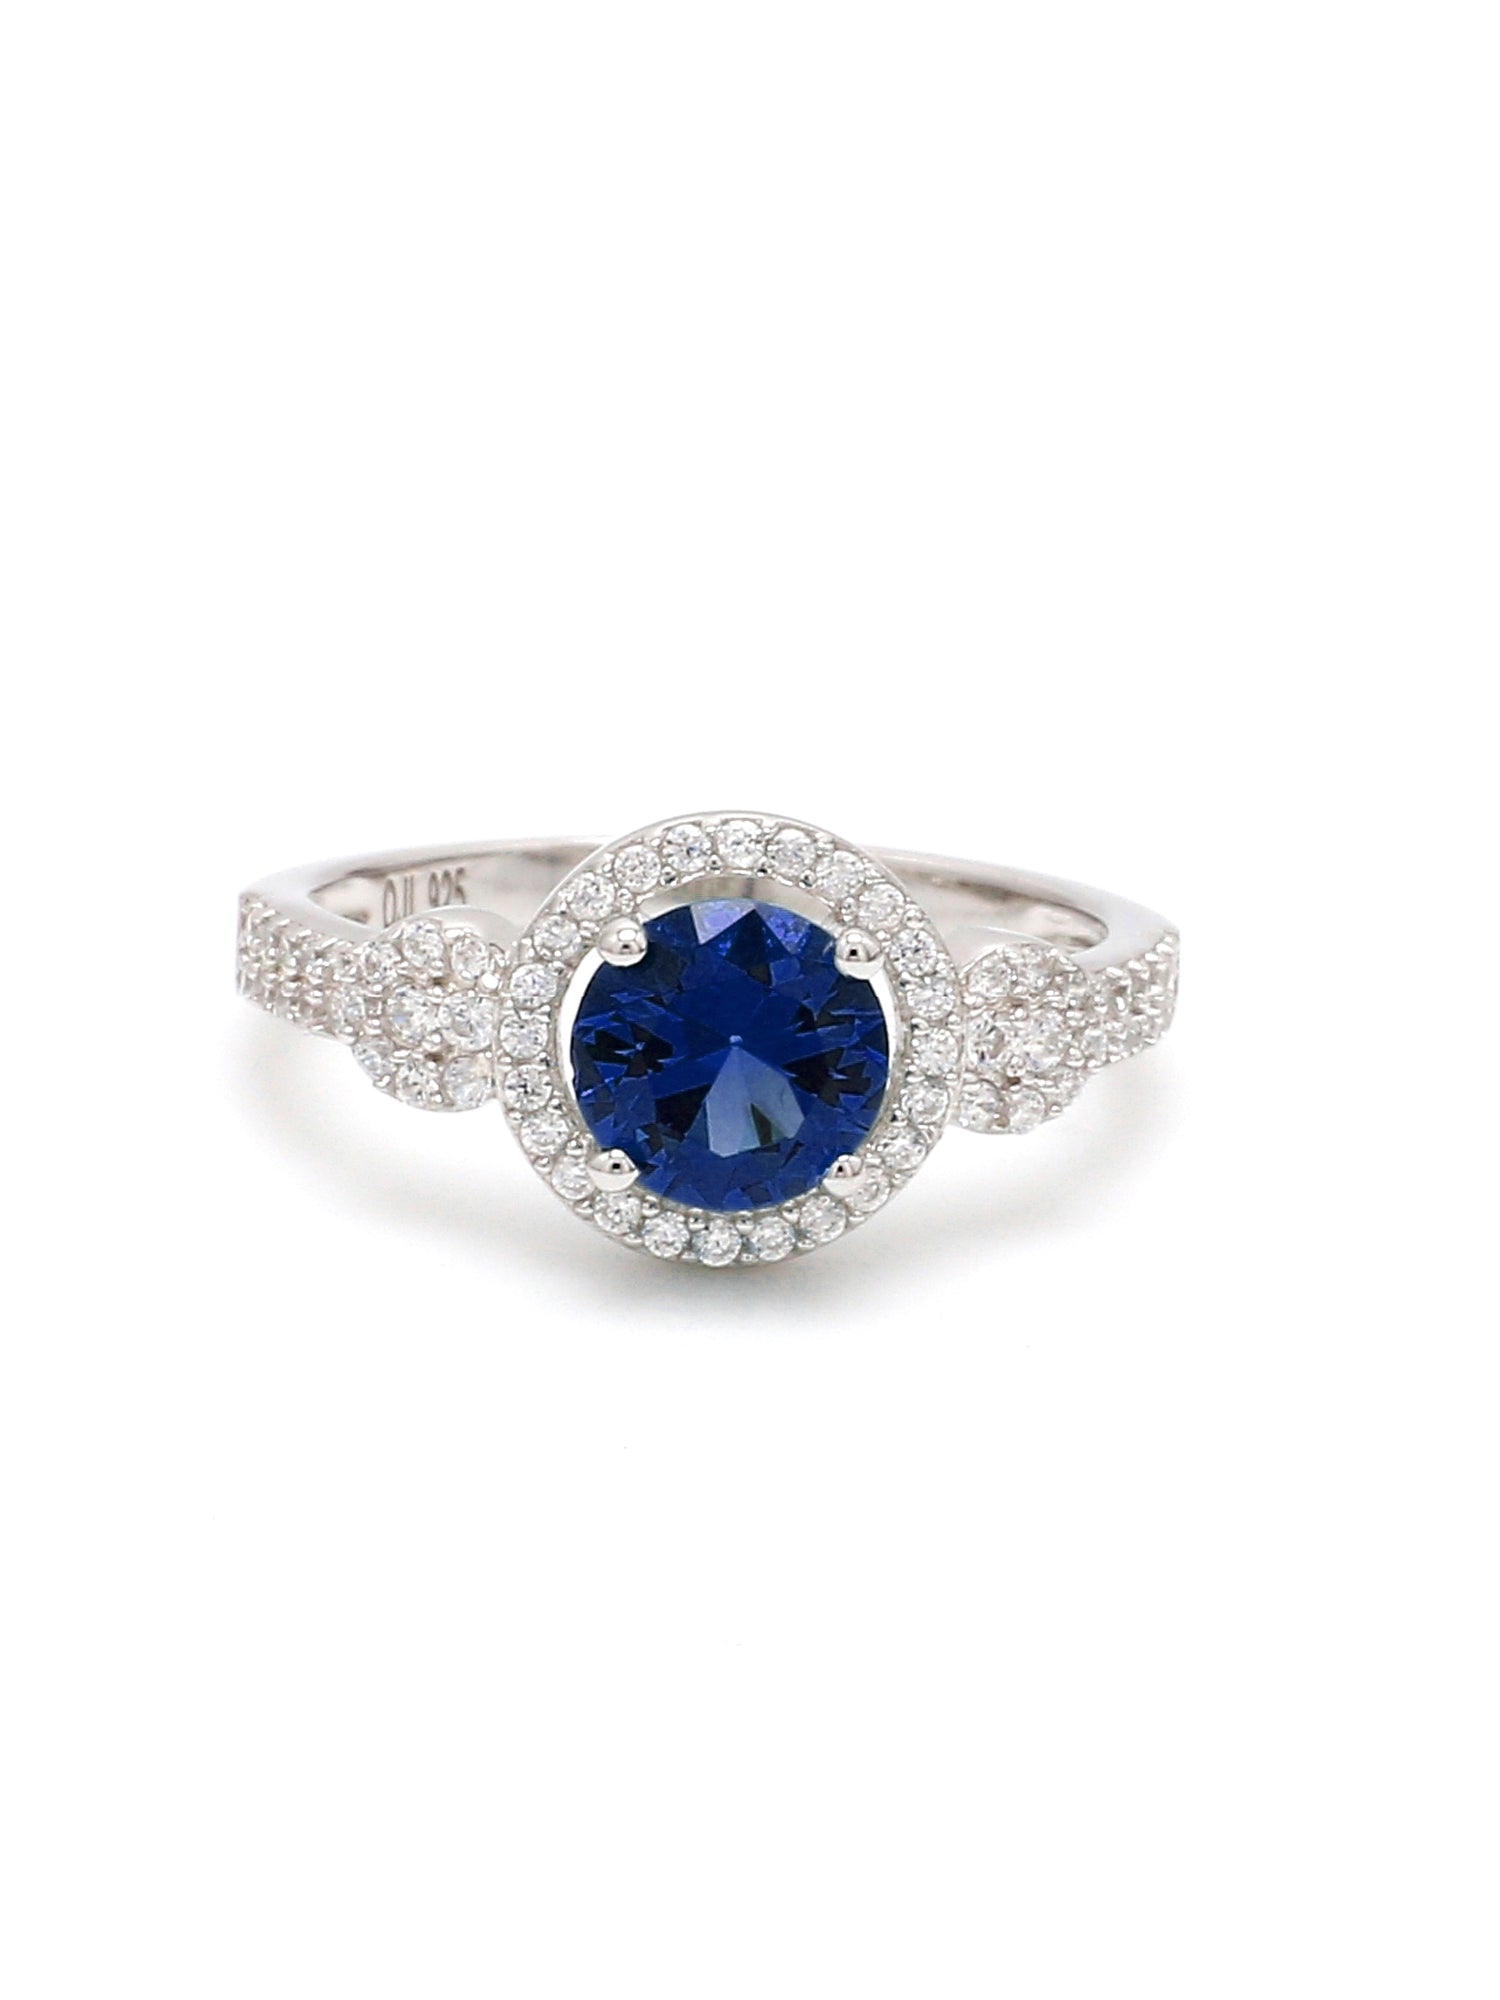 Blue Sapphire Luster 925 Silver Ring For Her